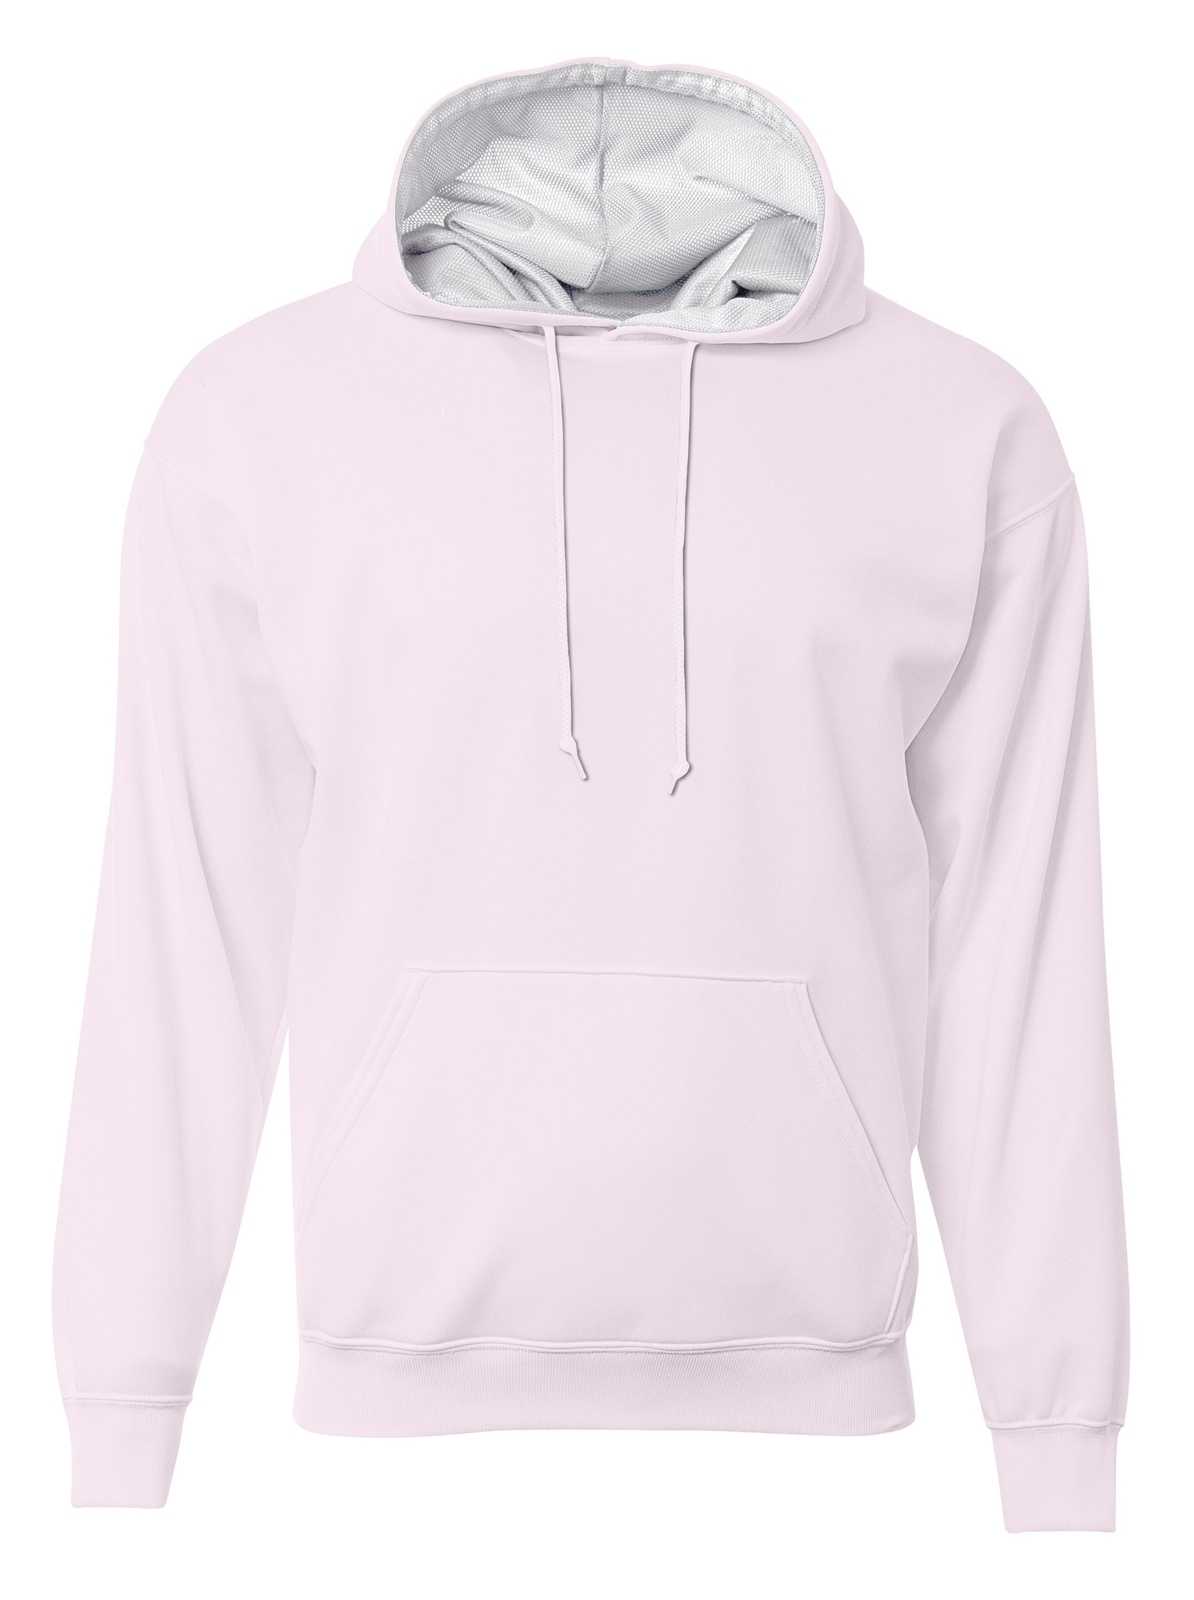 A4 N4279 Adult Sprint Fleece Hoodie - White - HIT a Double - 1